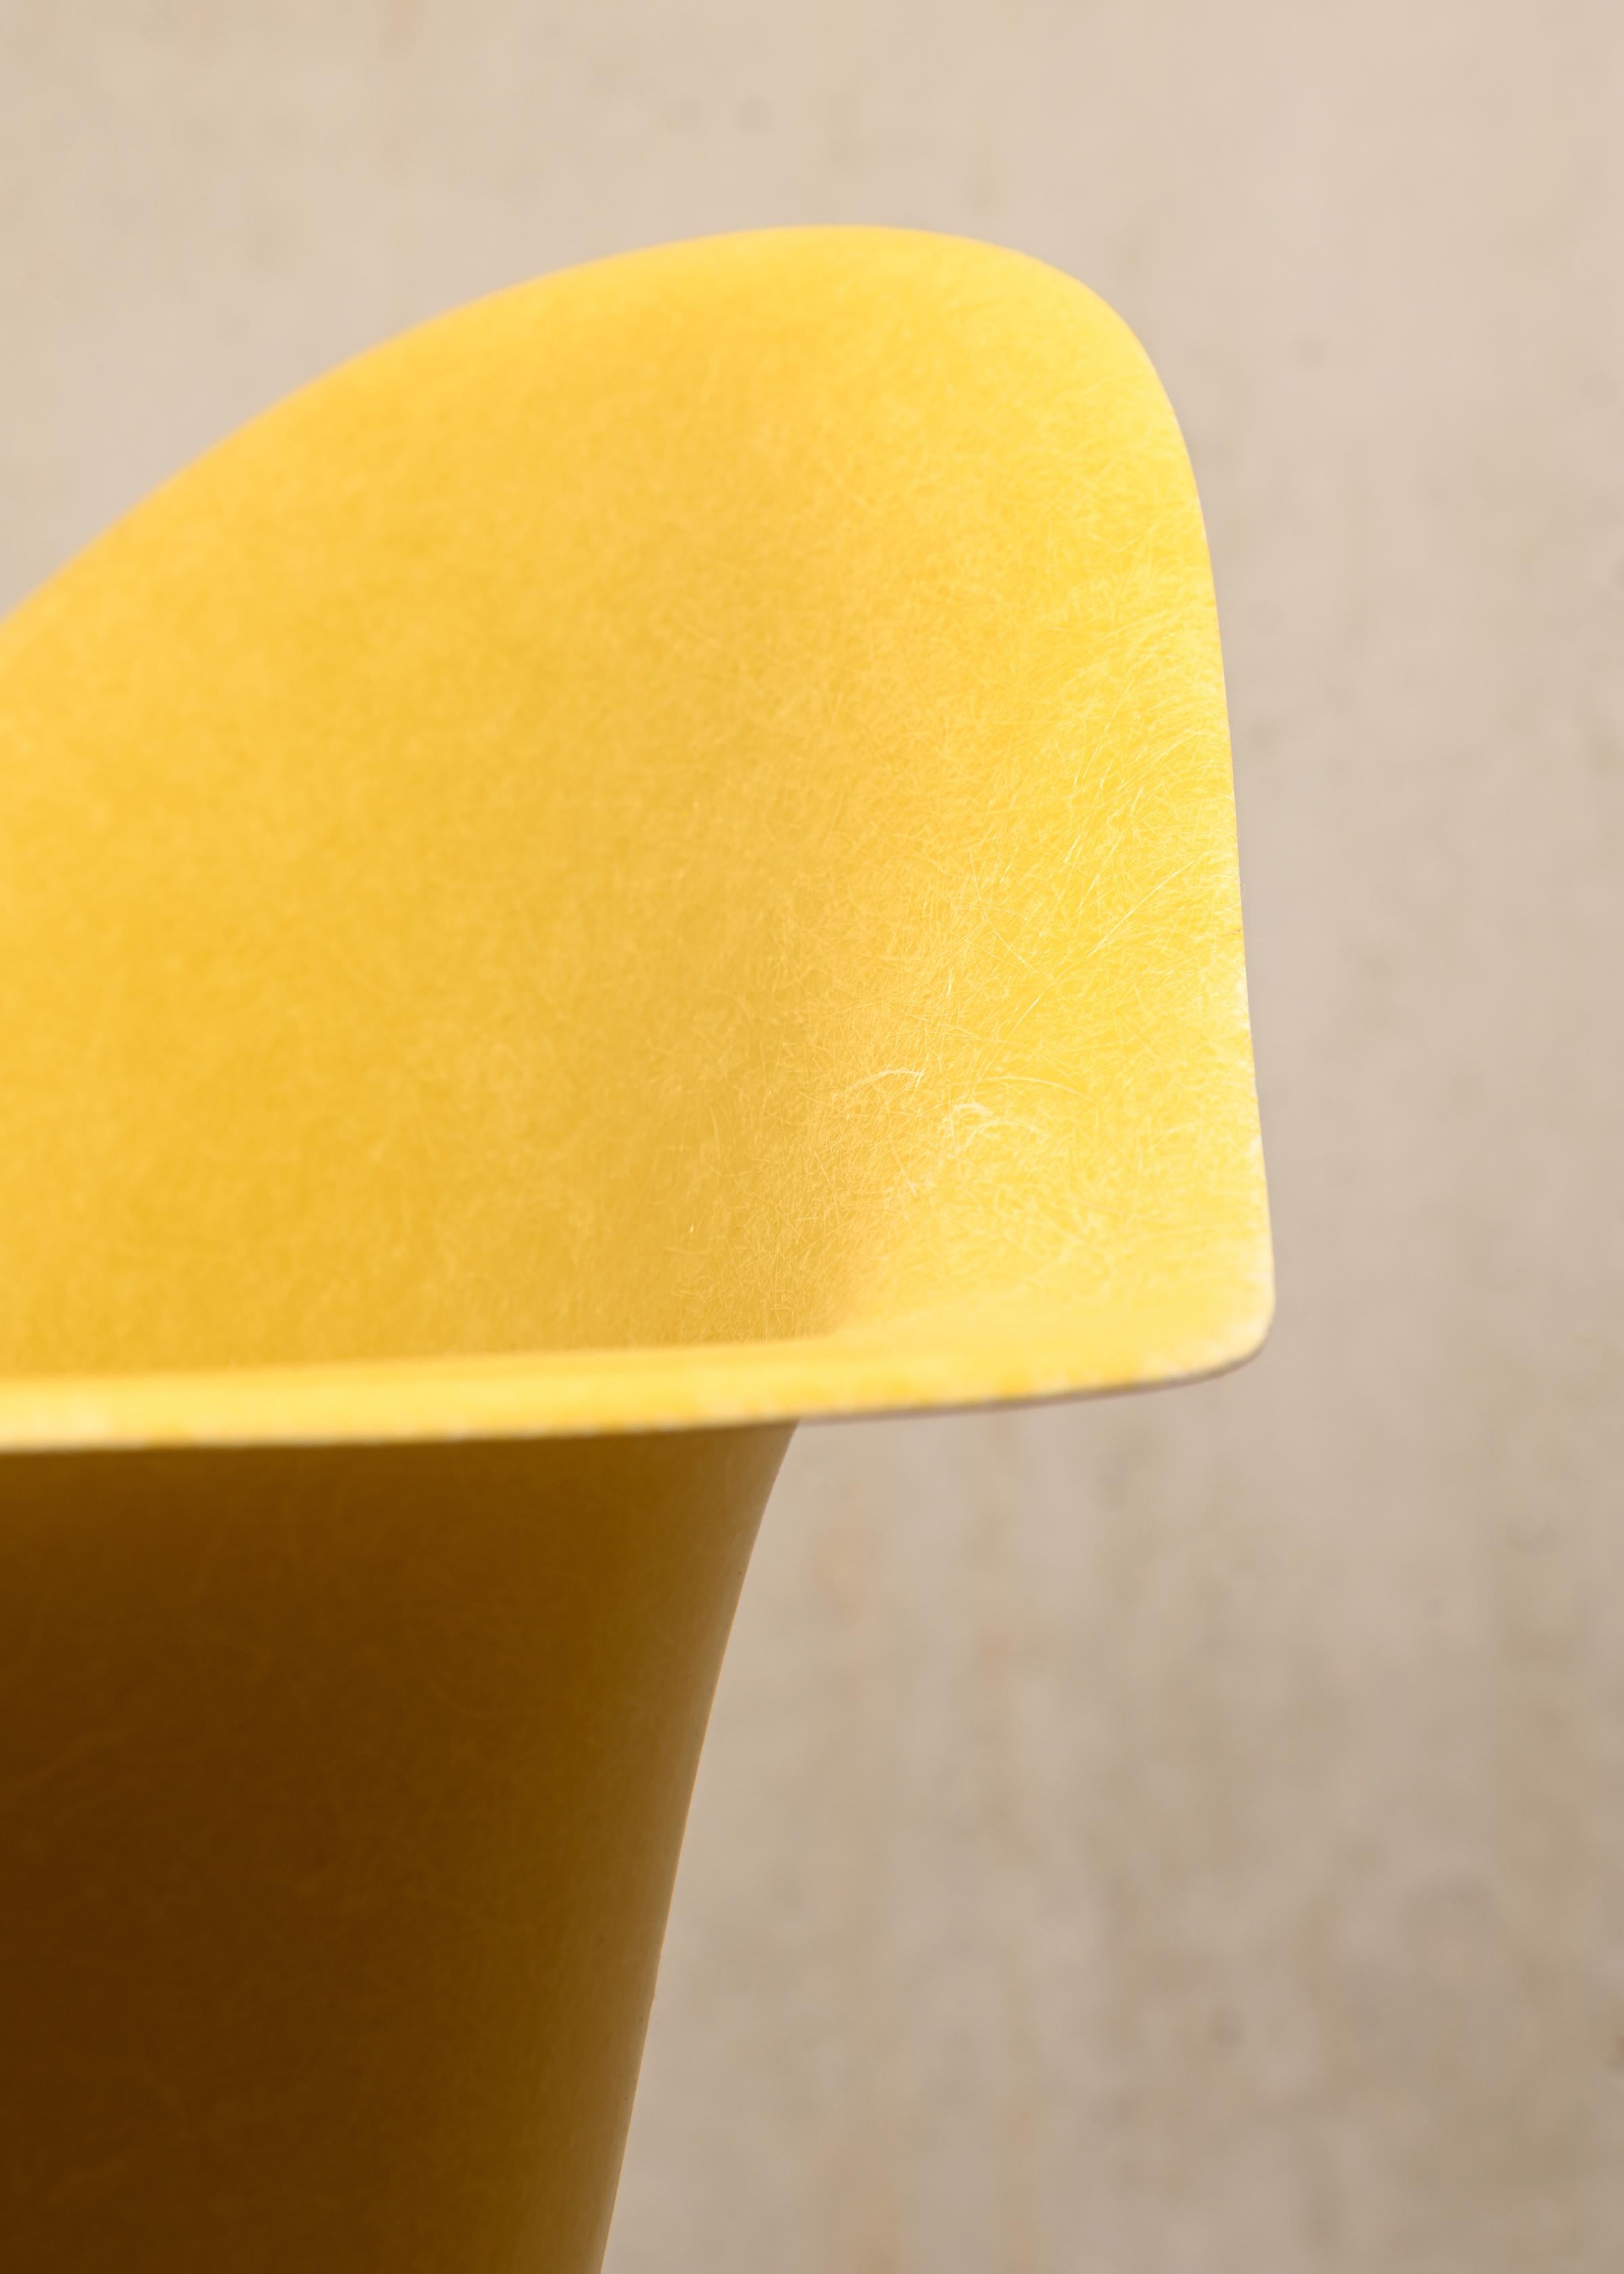 Charles & Ray Eames Max Armchair in Canary Yellow Fiberglass for Herman Miller 7